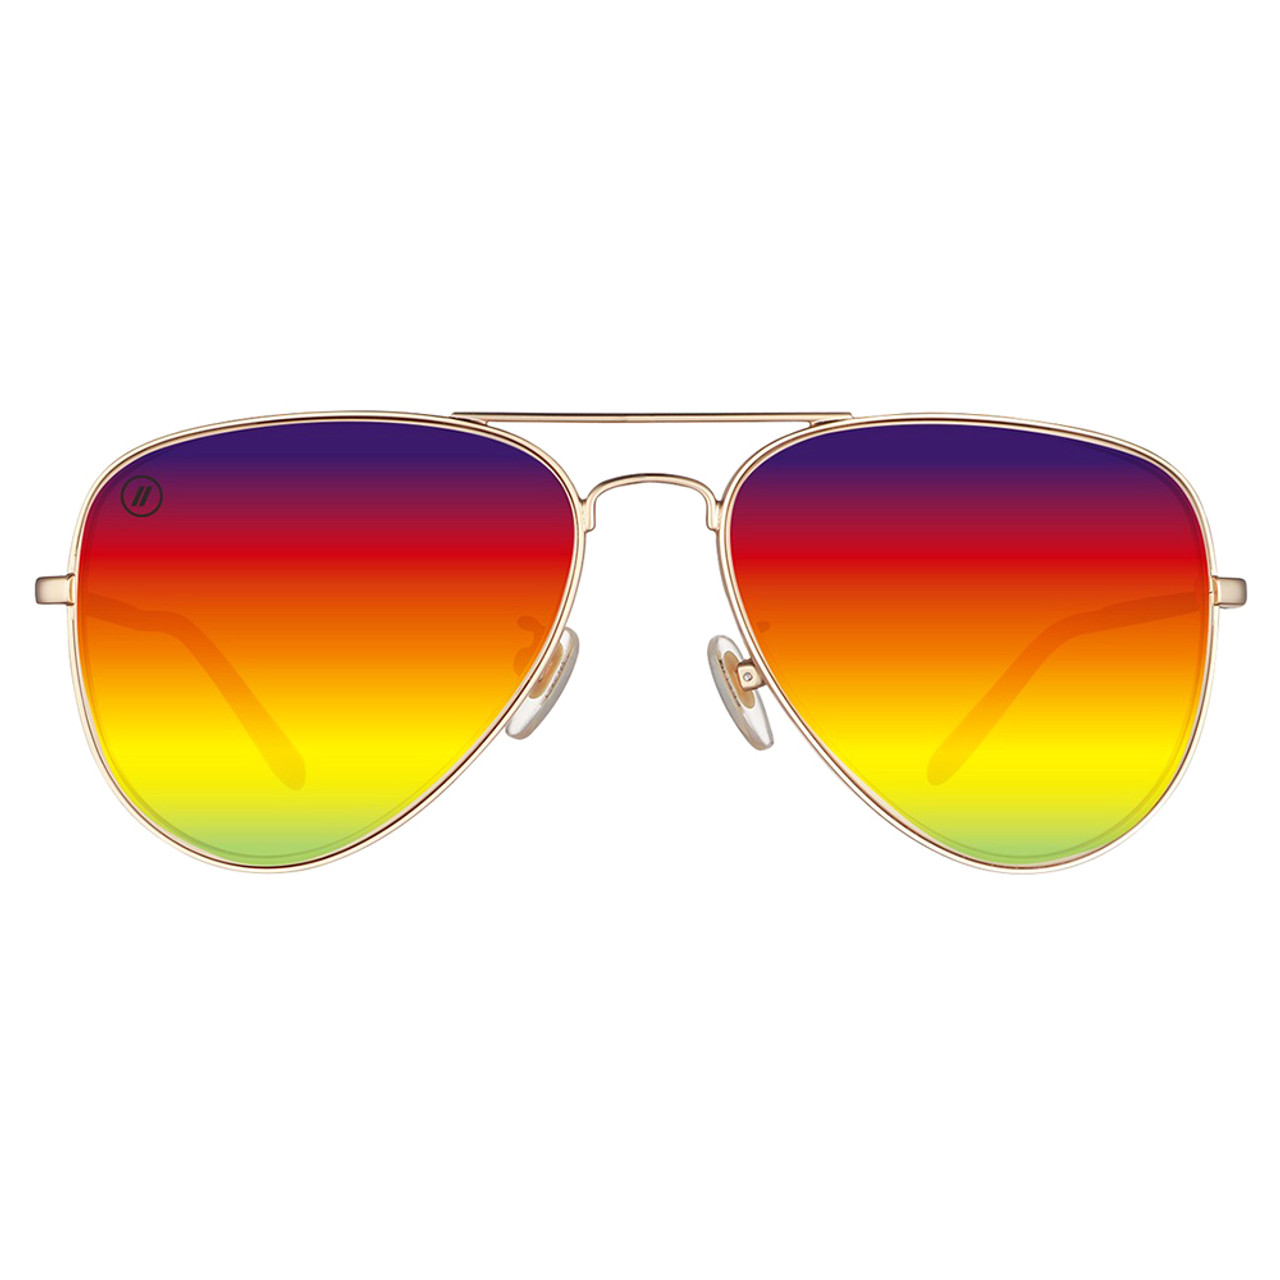 Aviator Sunglasses With Silver Frame And Dark Tint Lens Unisex - Blue -  CI125Q8ZHPF